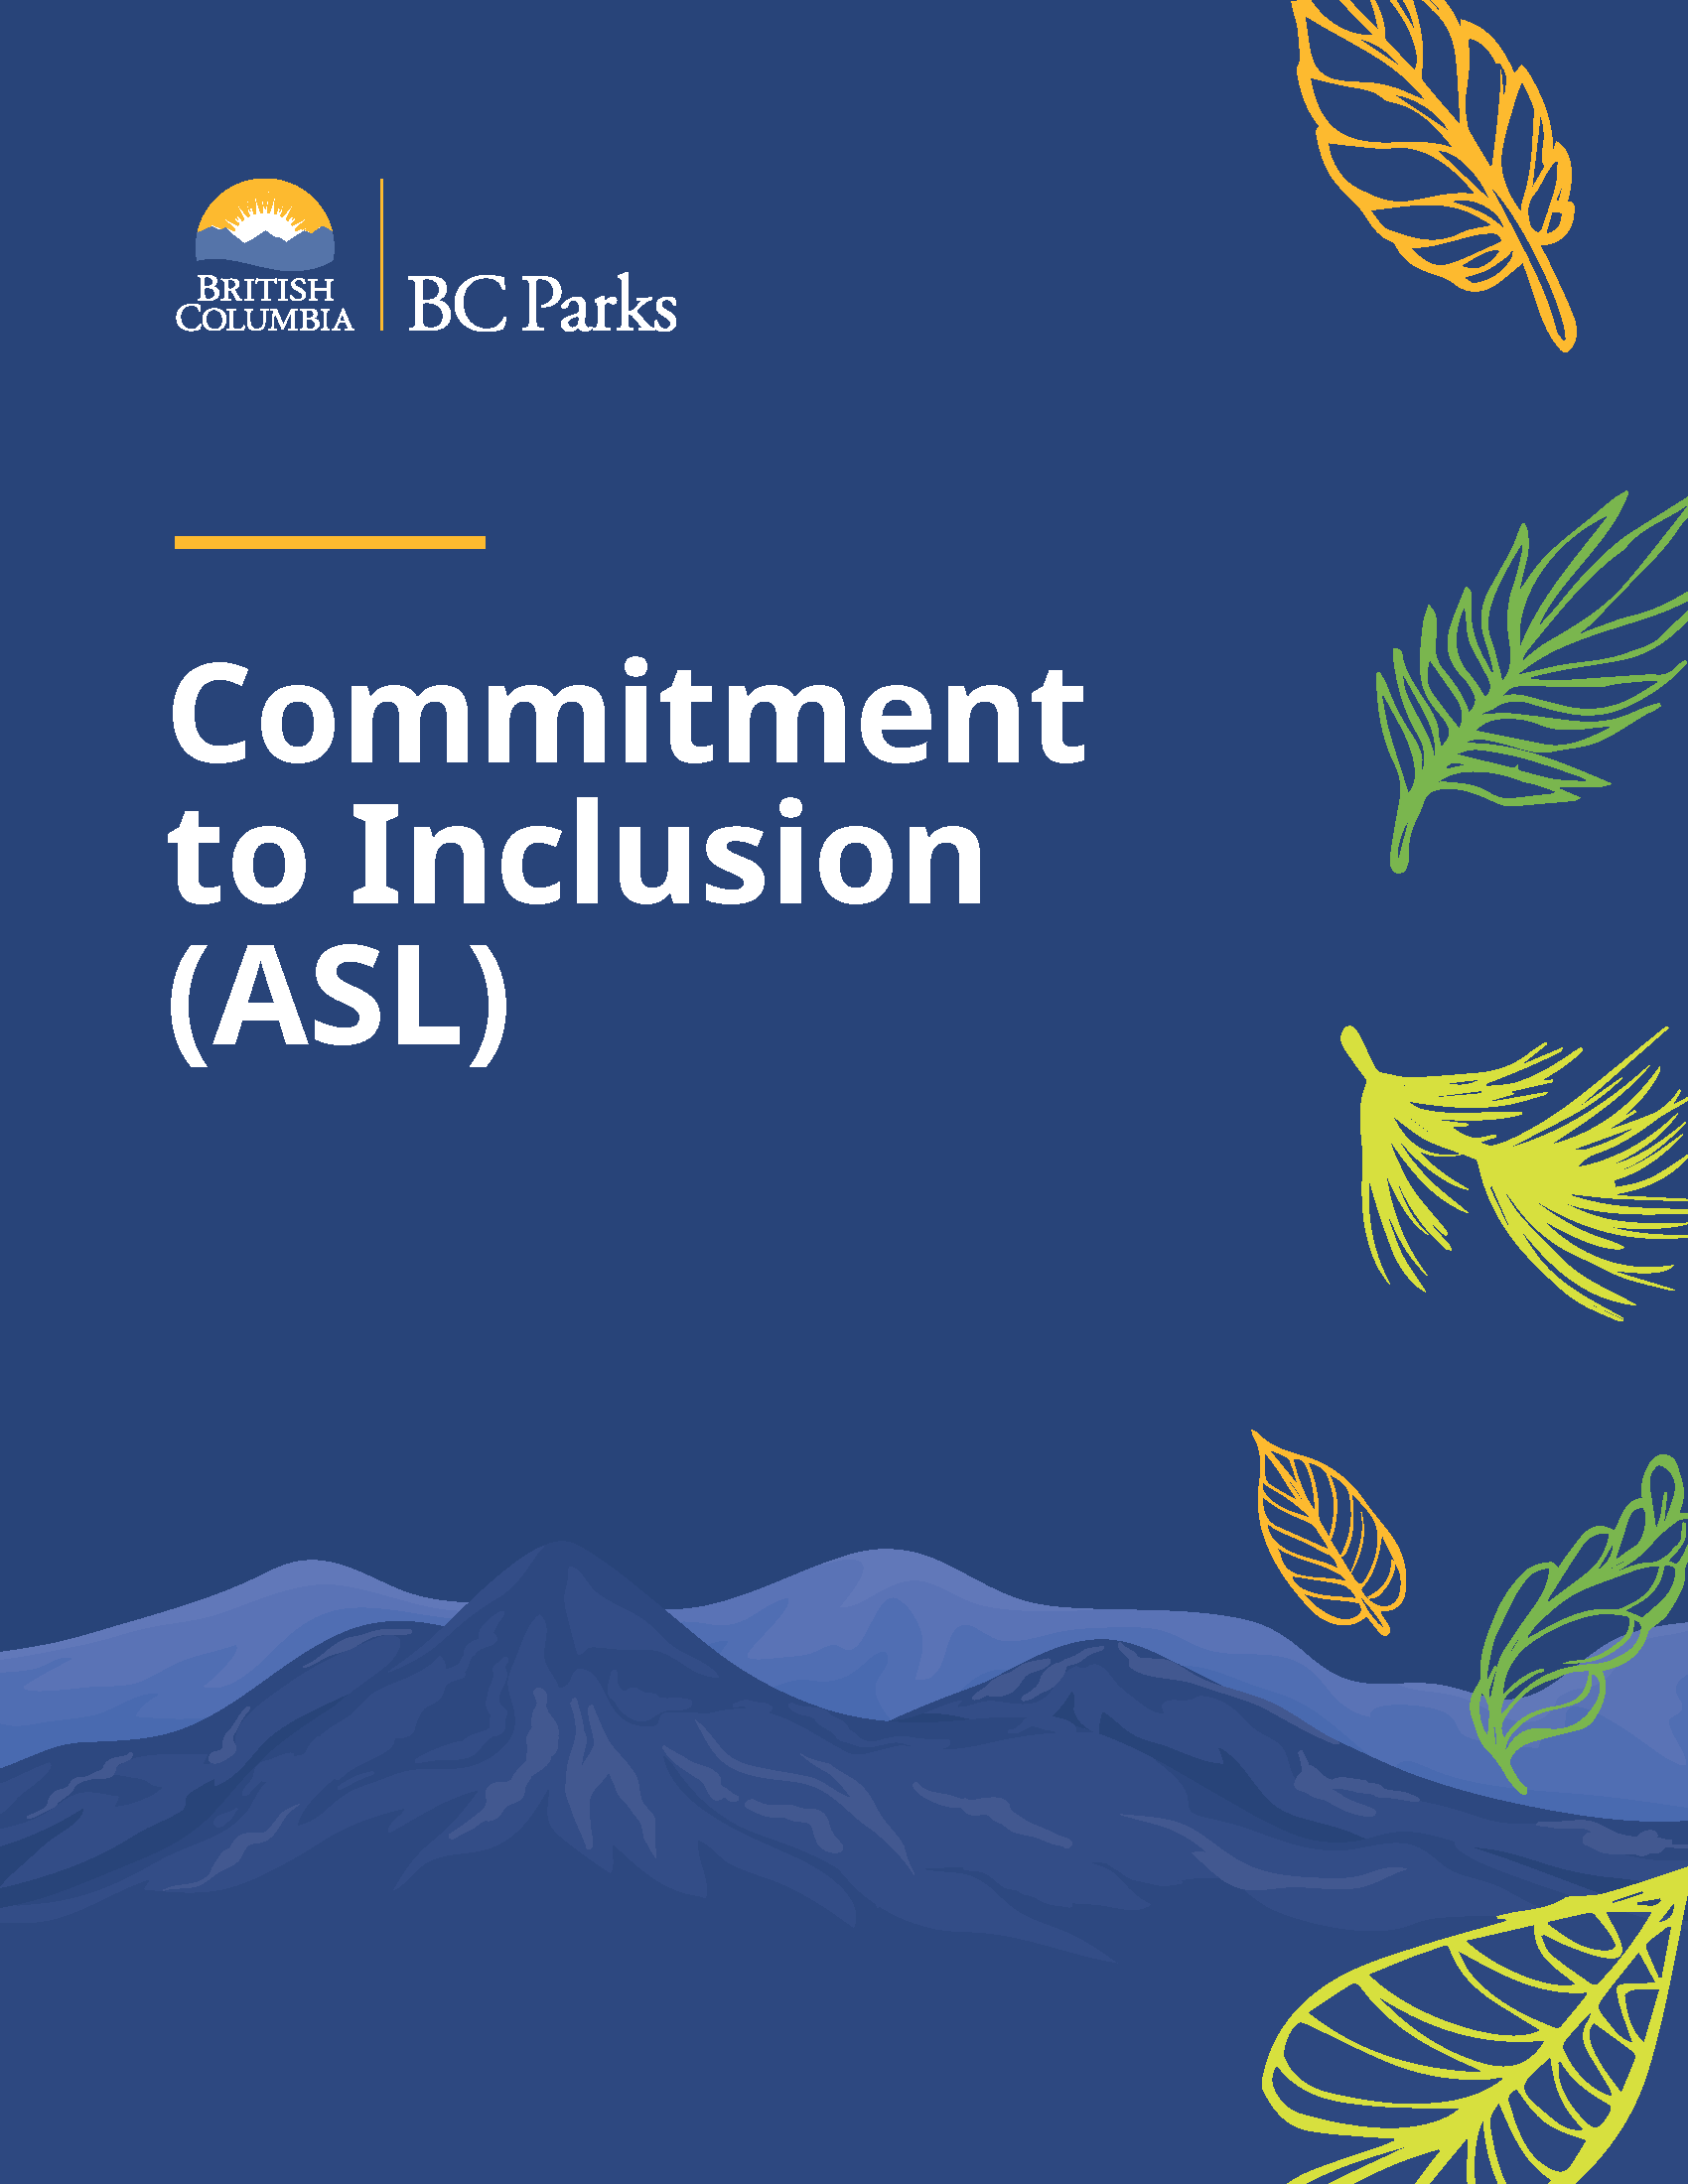 BC Parks Commitment to Inclusion PDF in ASL